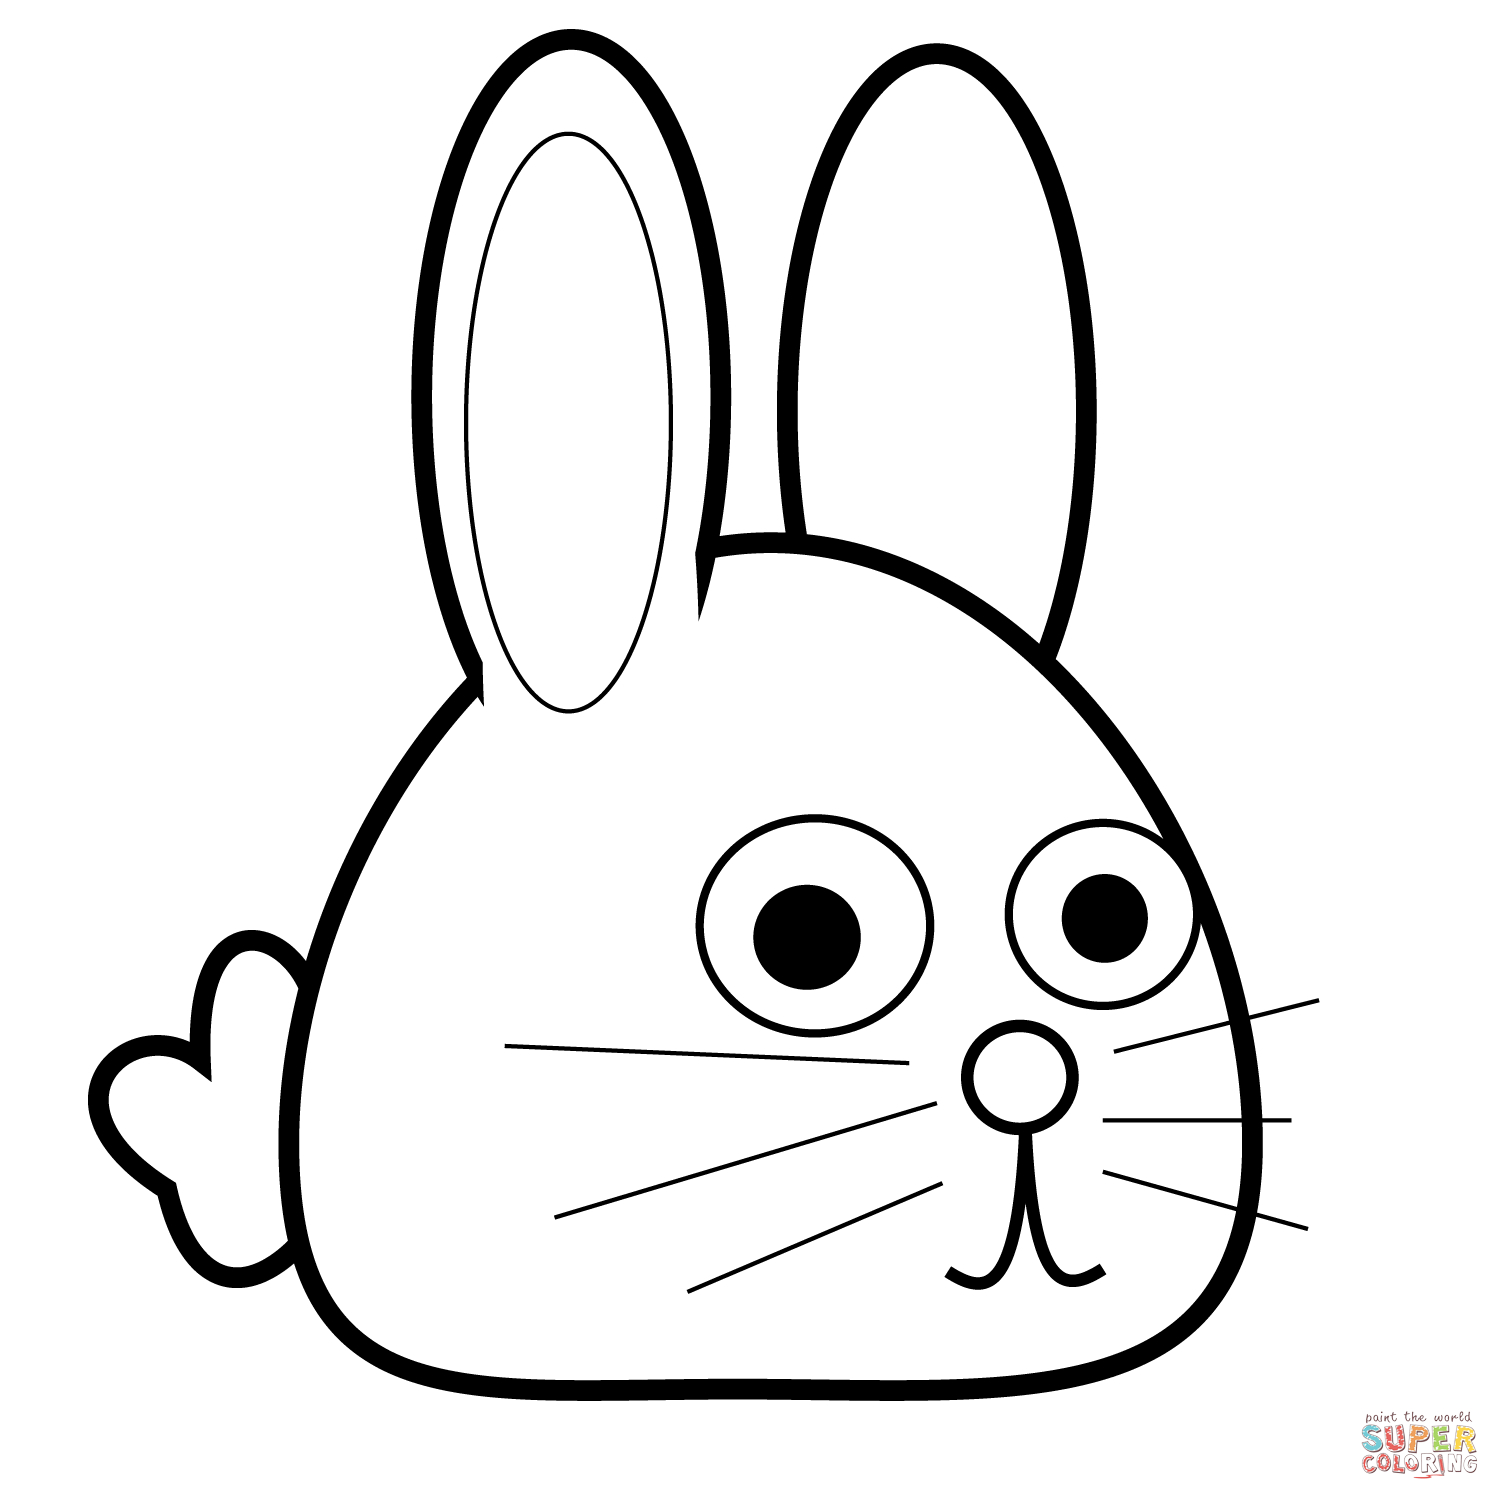 Free Rabbit Coloring Pages Spring Bunny Coloring Page Free Printable Coloring Pages